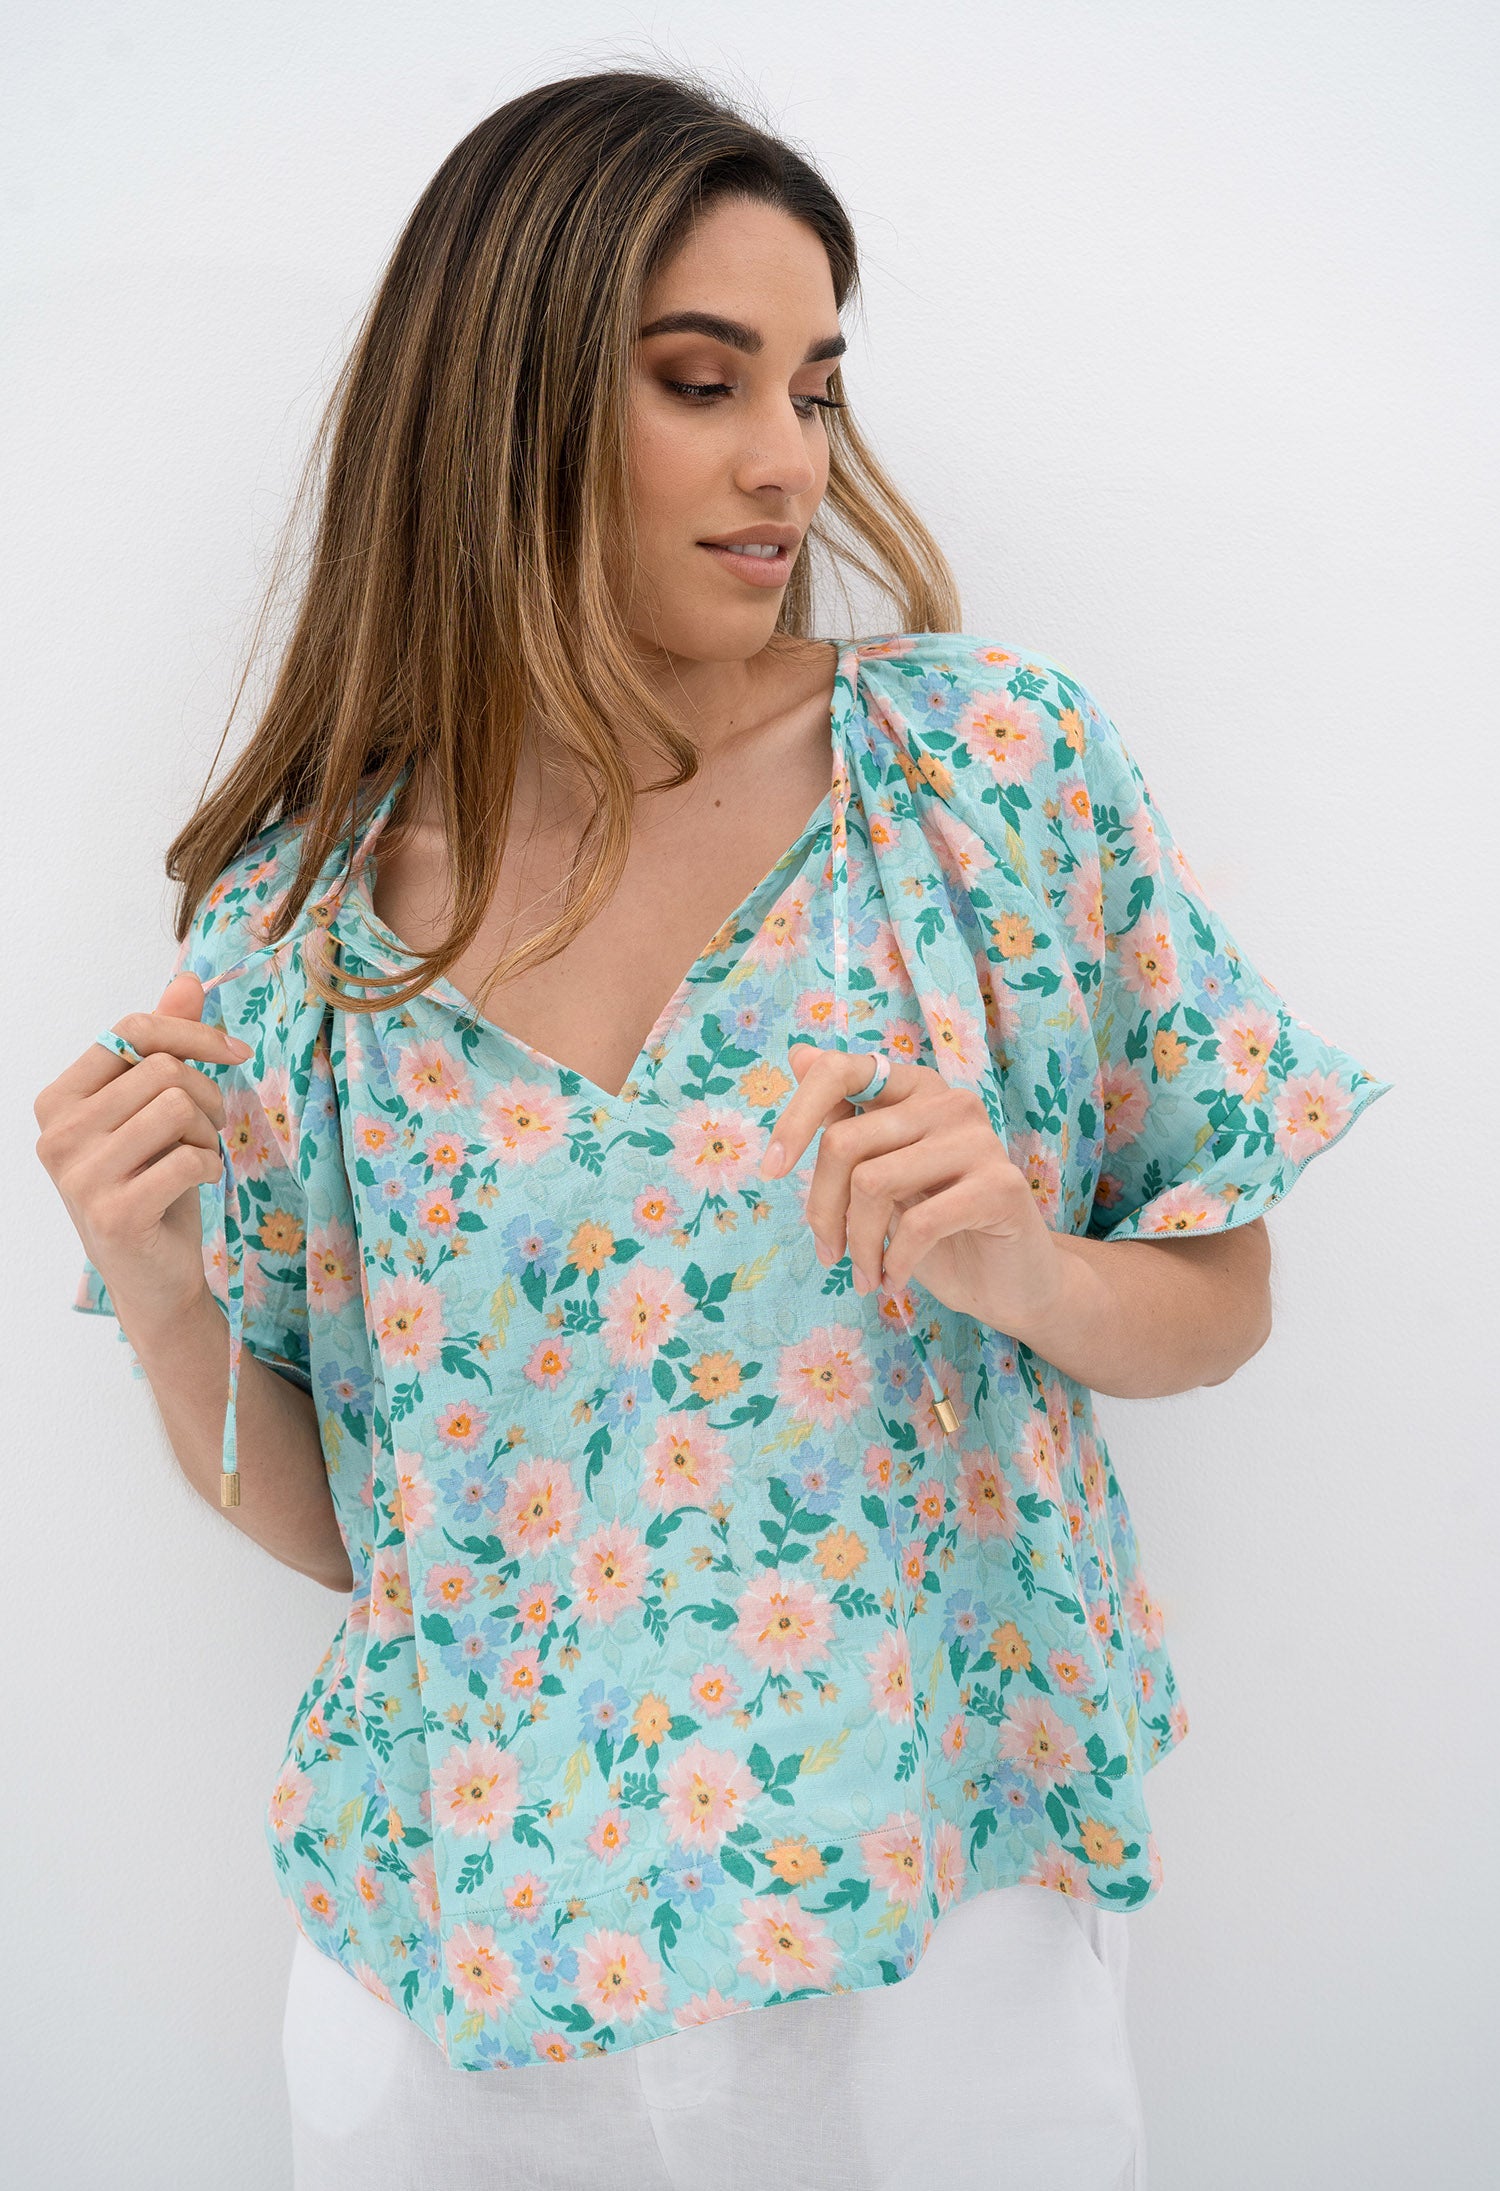 STARDUST BLOOM BLOUSE – Humidity Lifestyle